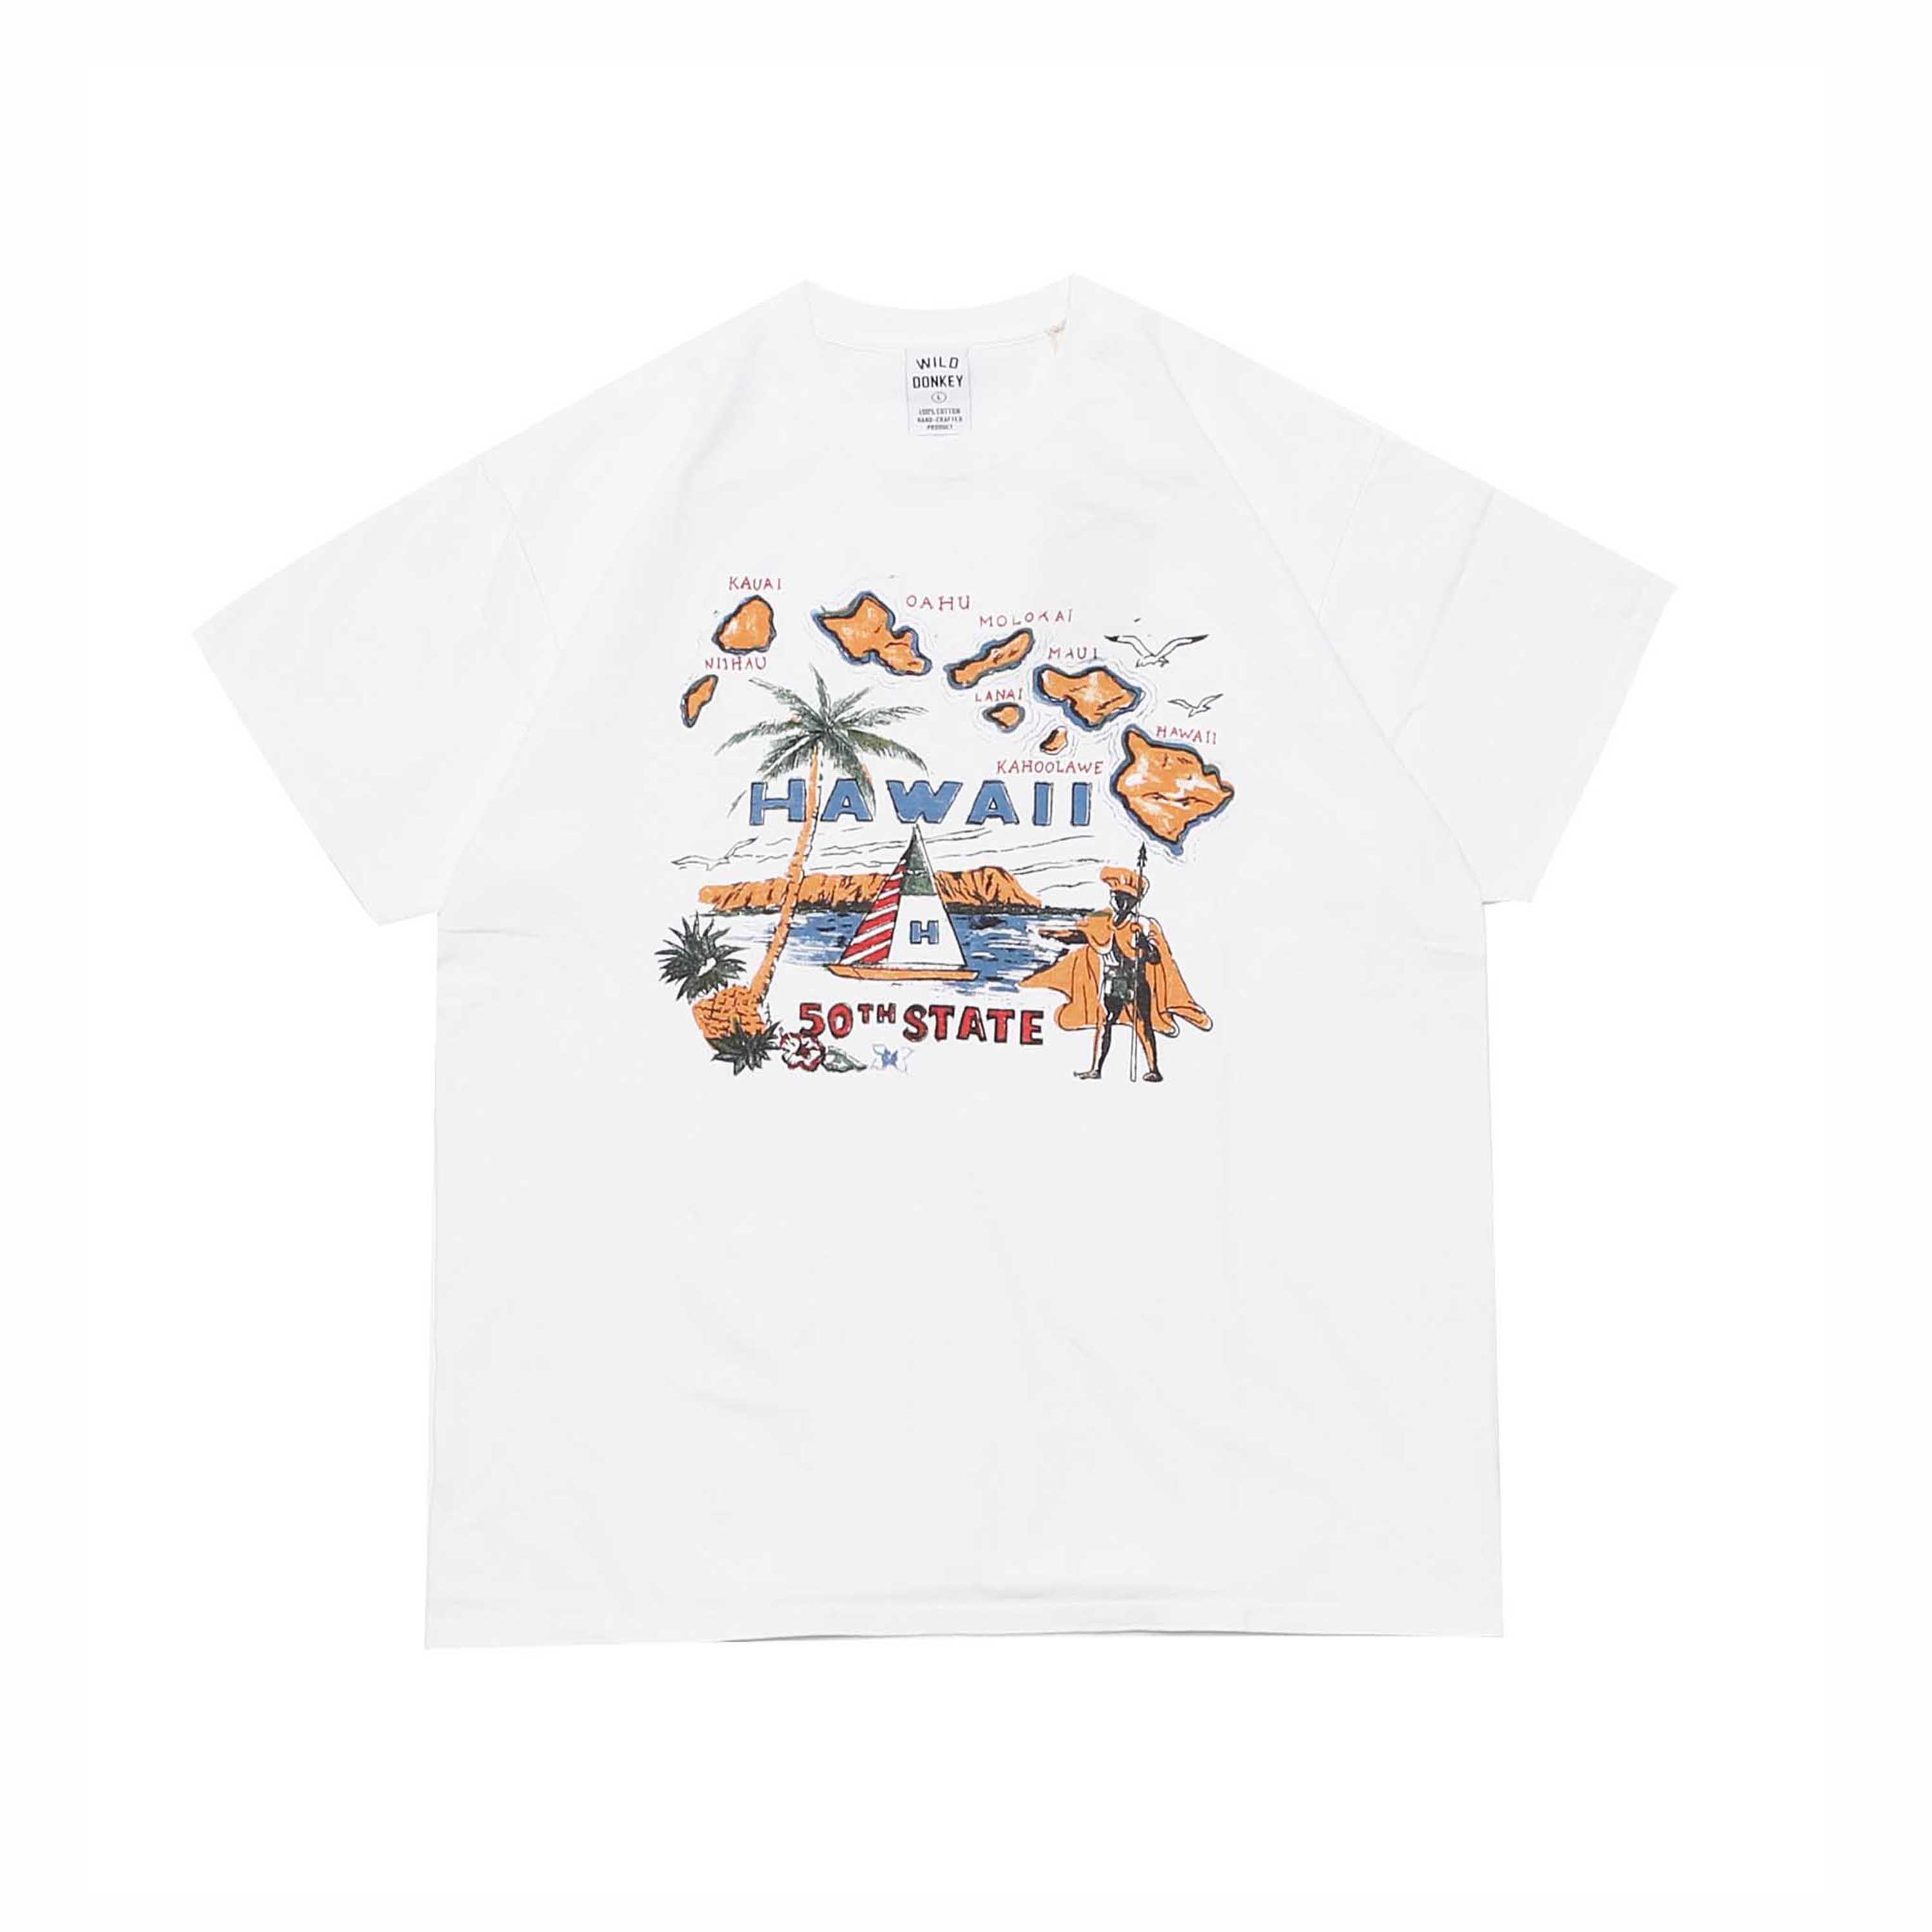 T-50TH STATE S/S TEE - WHITE